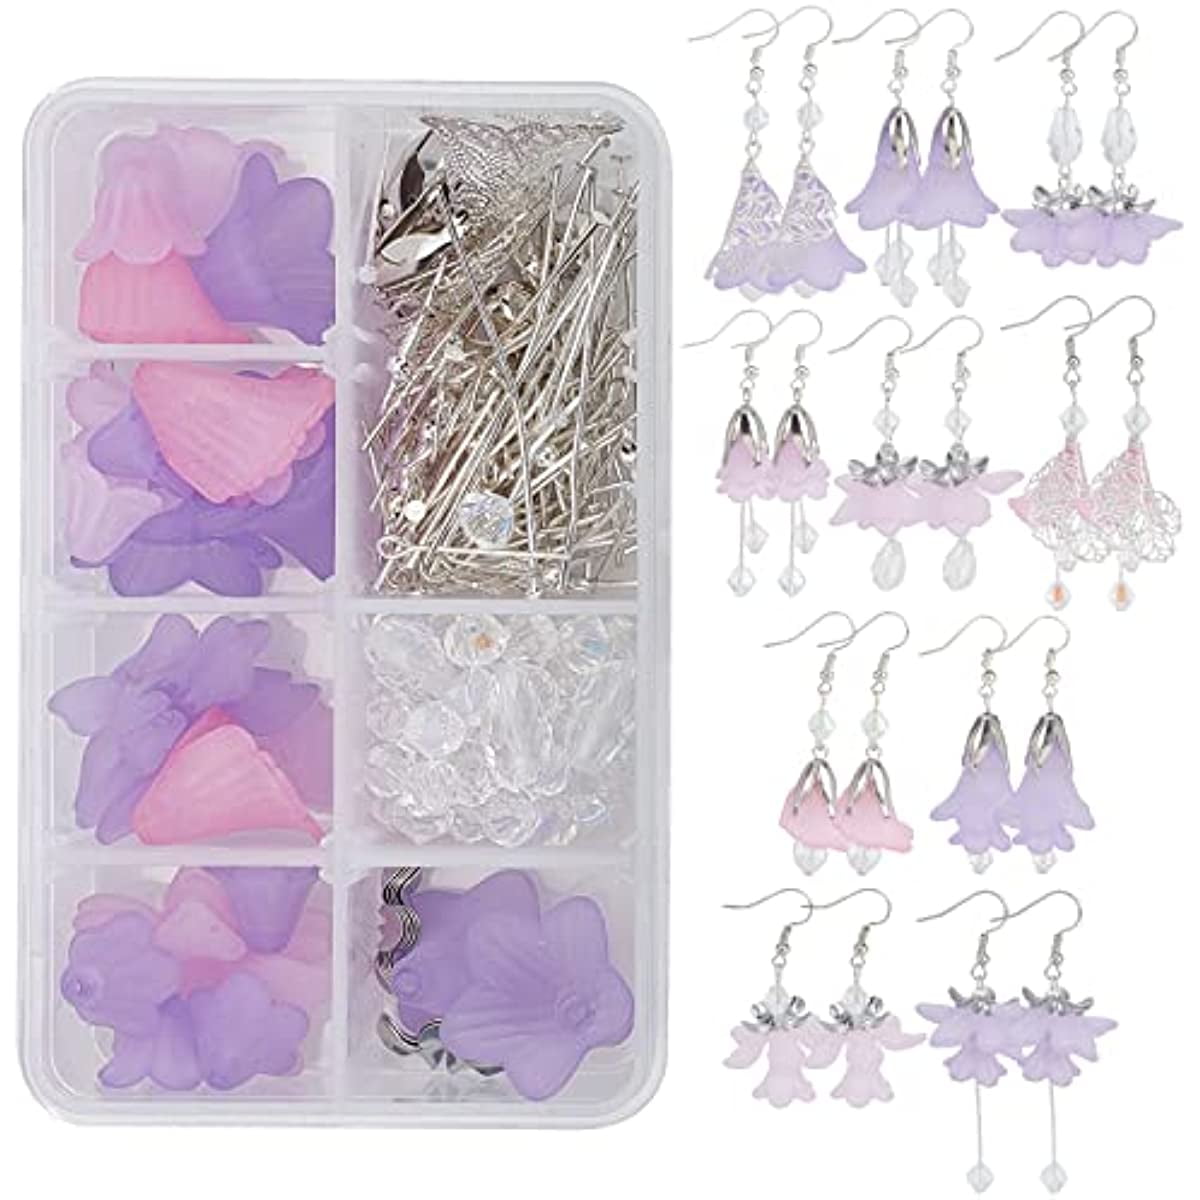 EXCEART 50pcs Cherry Blossom Pendant Pink Flower Charm DIY Crafting Flower  Charms Little Flower Charms Keychain for Crafts Jewels for Crafts Bead